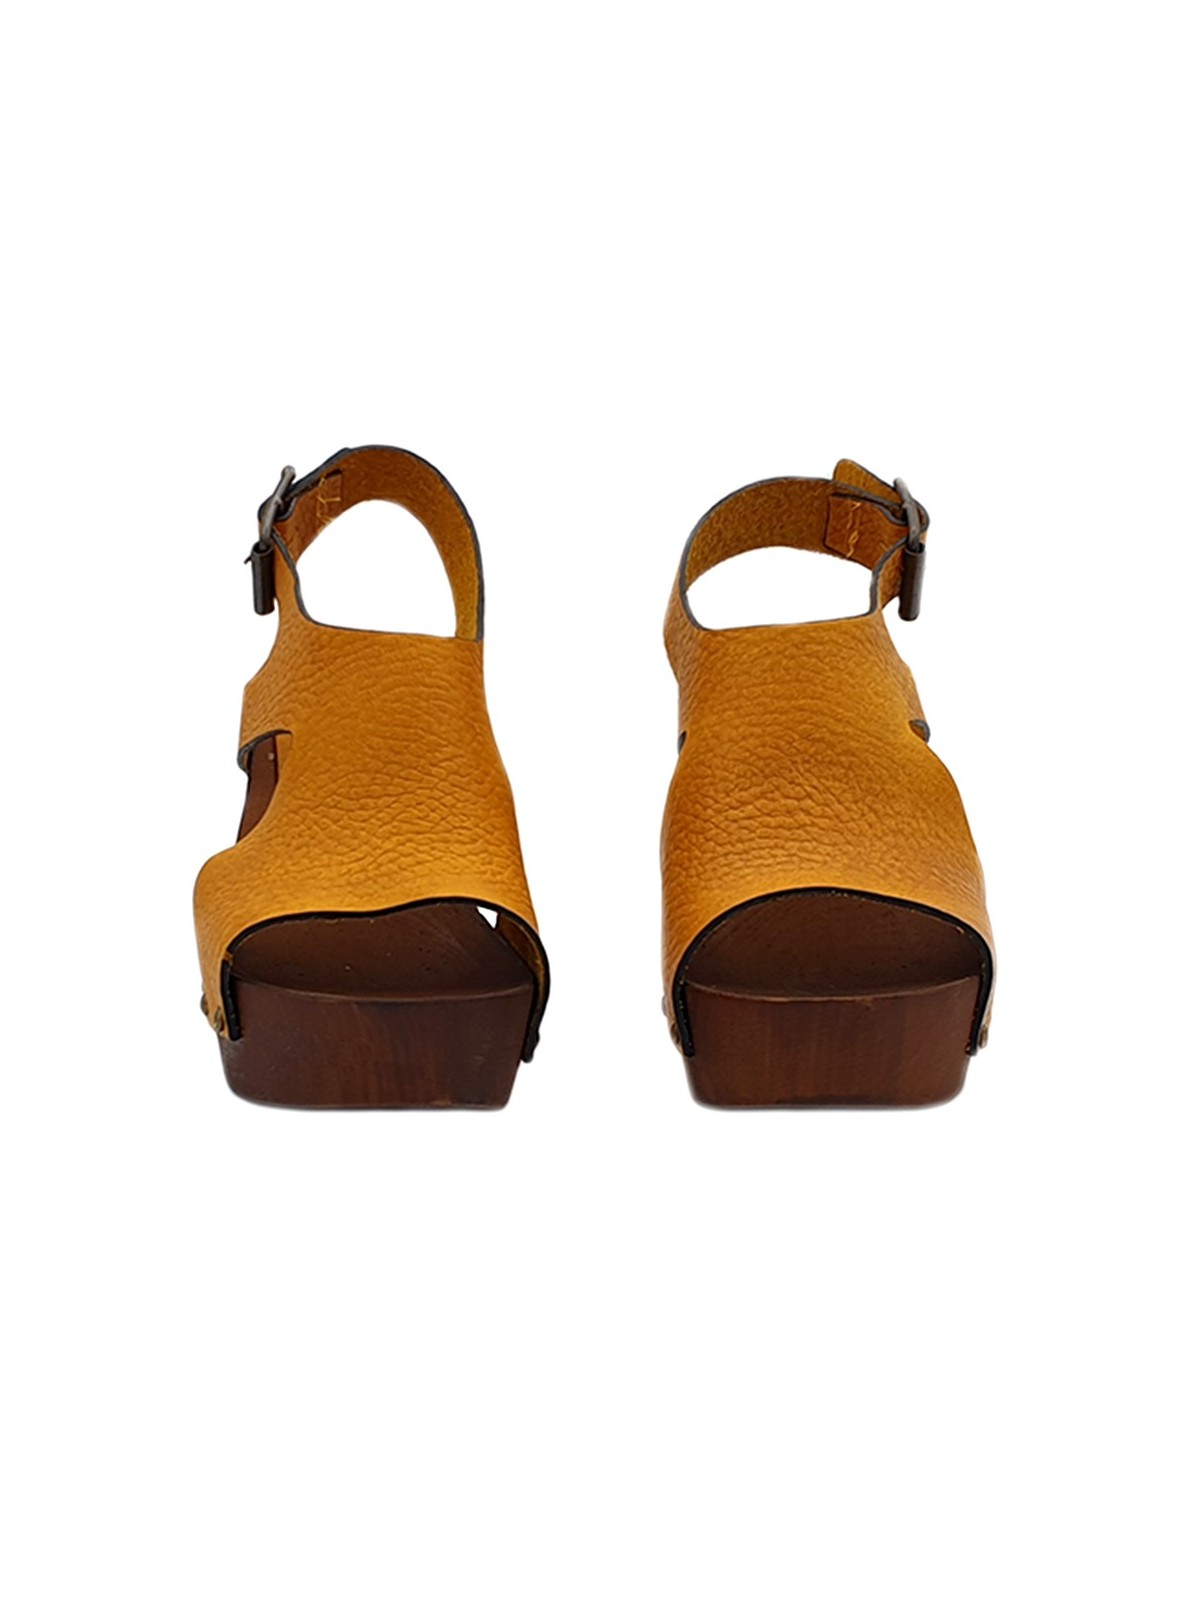 YELLOW CLOGS IN LEATHER AND COMFY HEEL 9